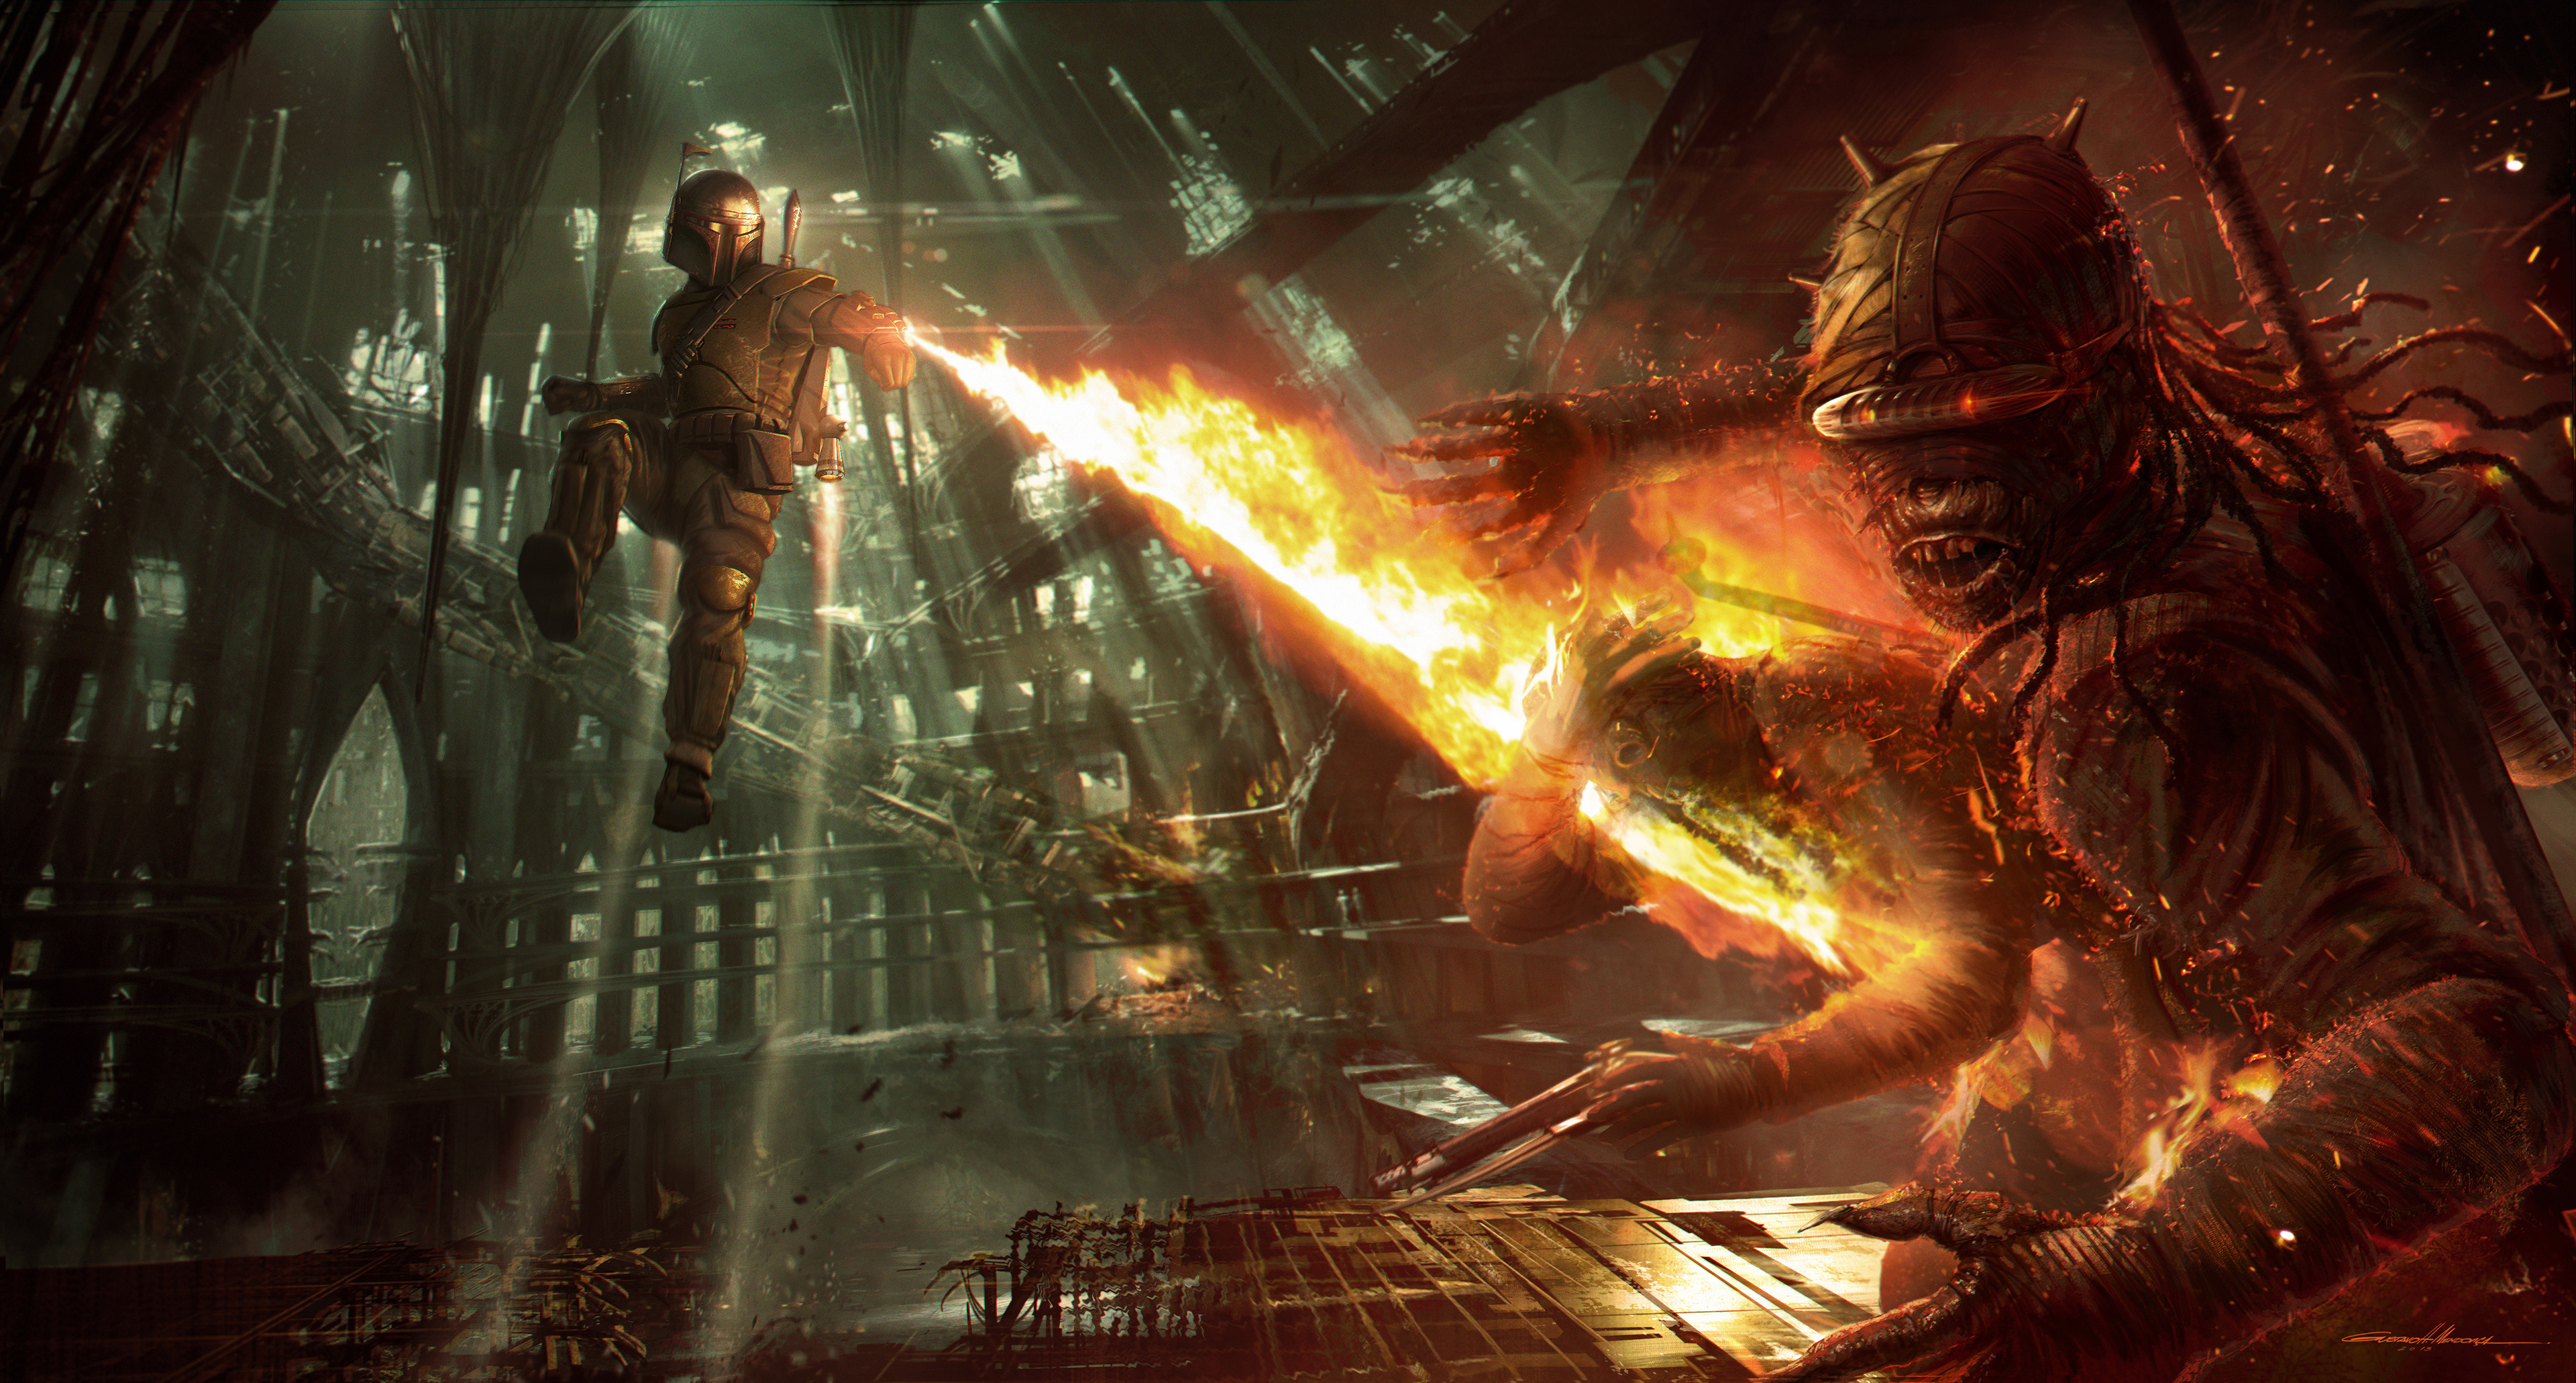 Video Game Star Wars 1313 HD Wallpaper | Background Image